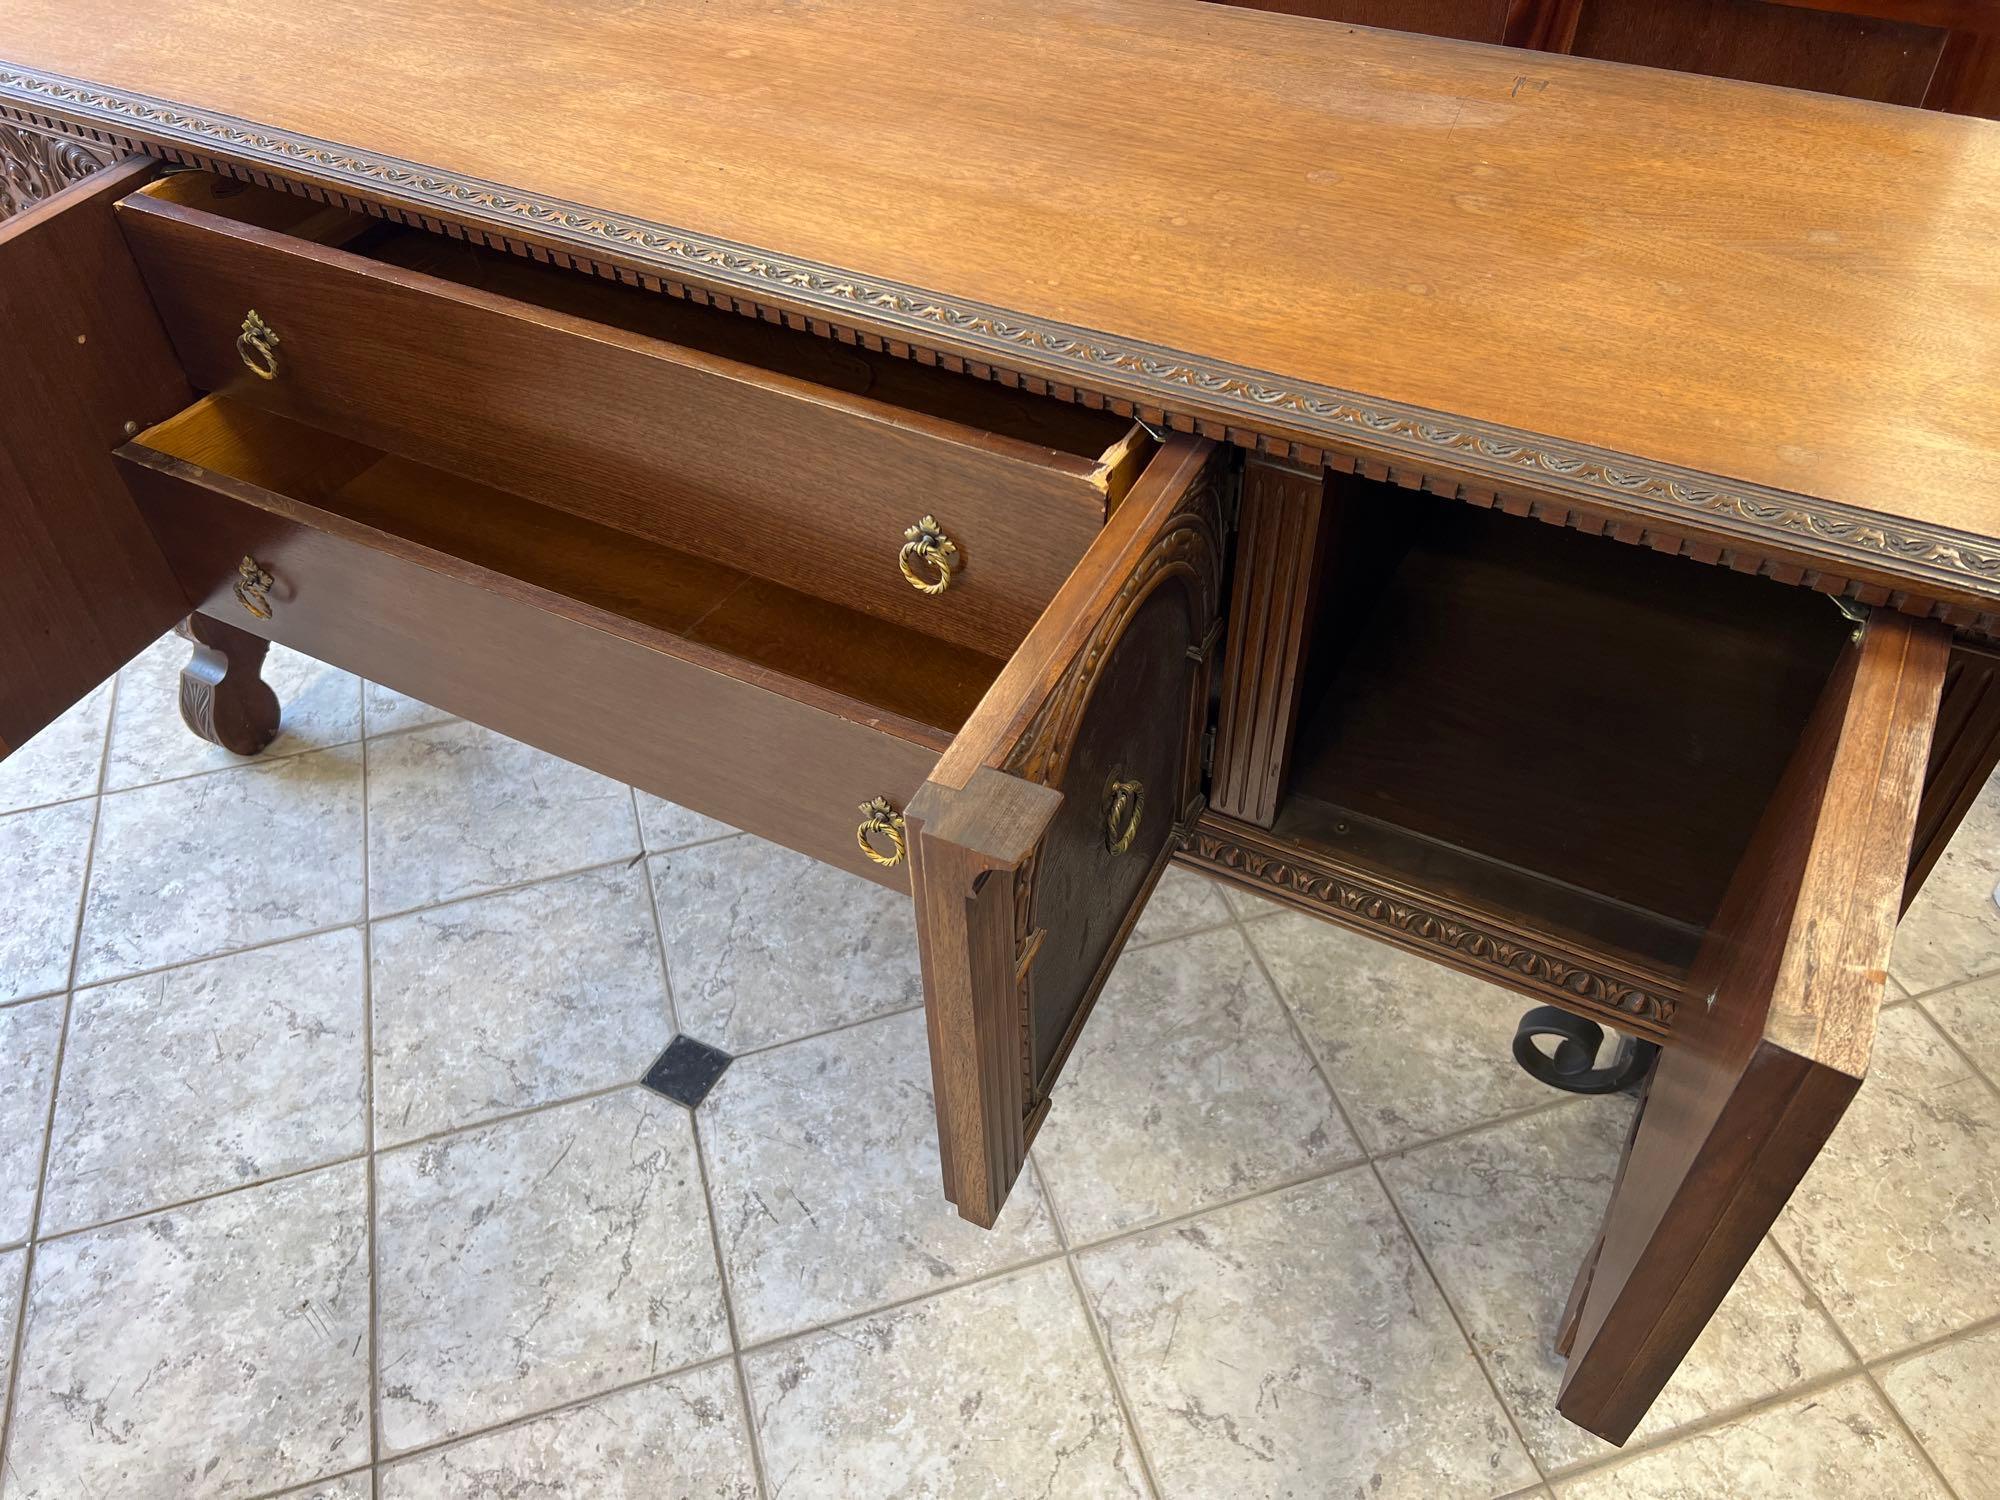 1940s Ornate Wood Buffet Server with Wrought Iron Accents